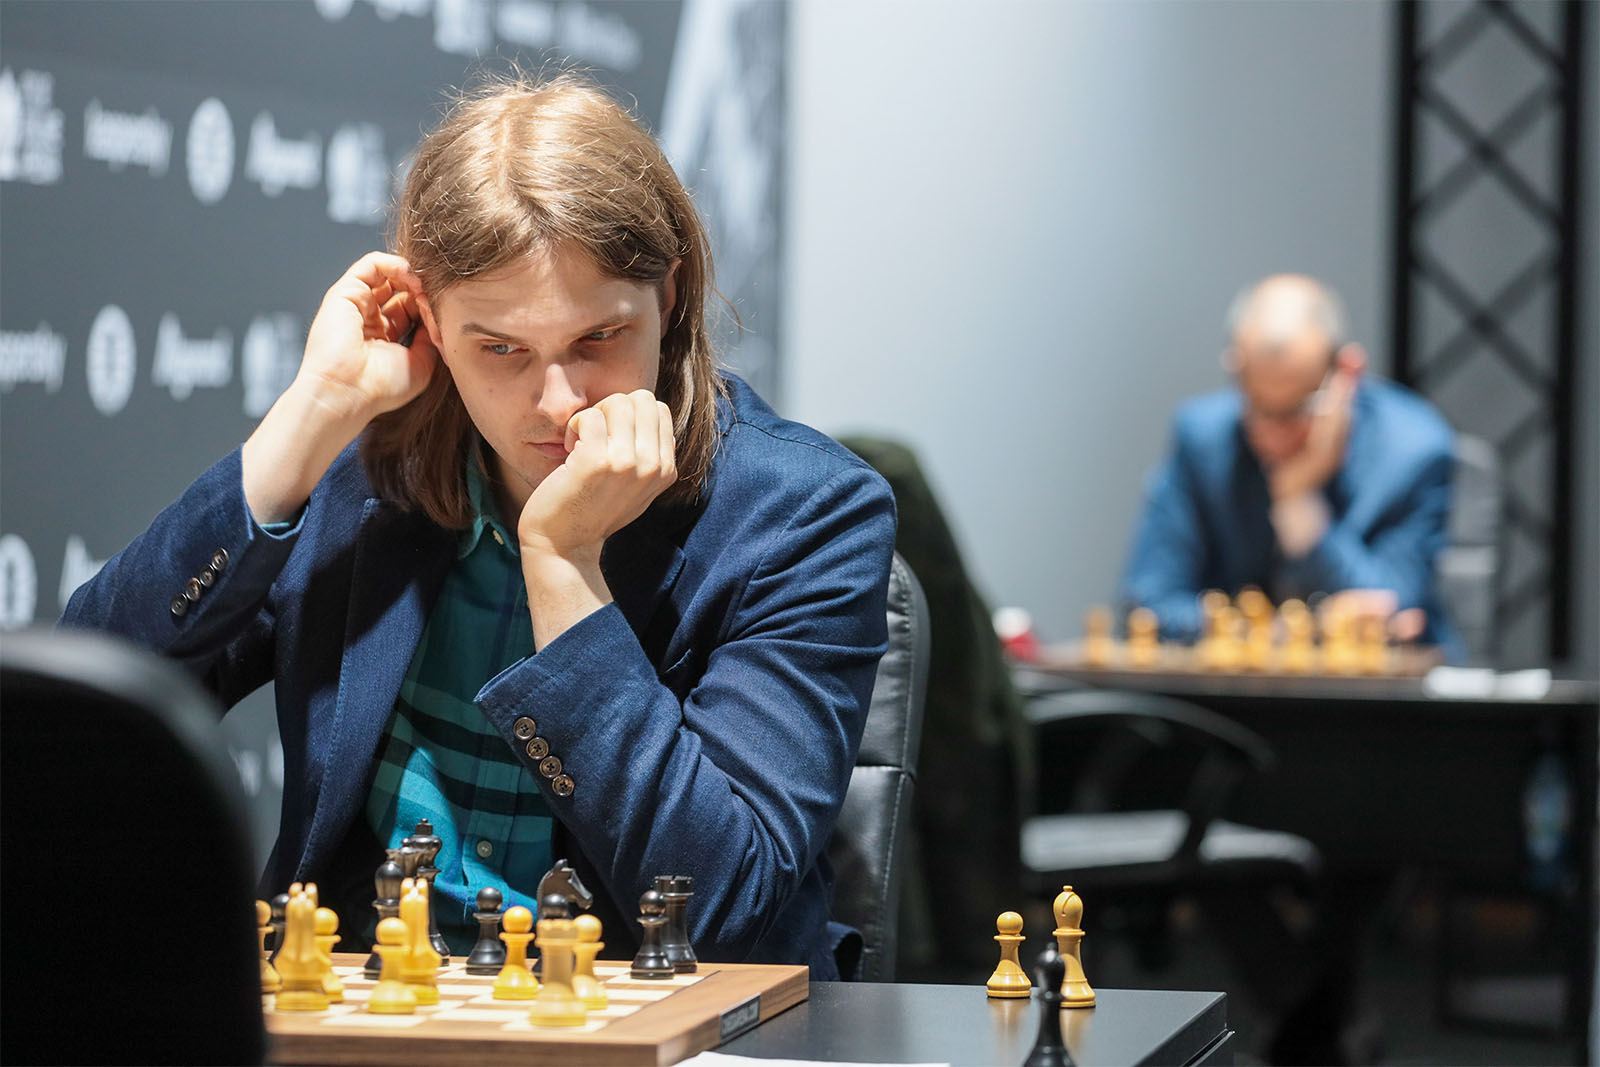 The chess games of Richard Rapport